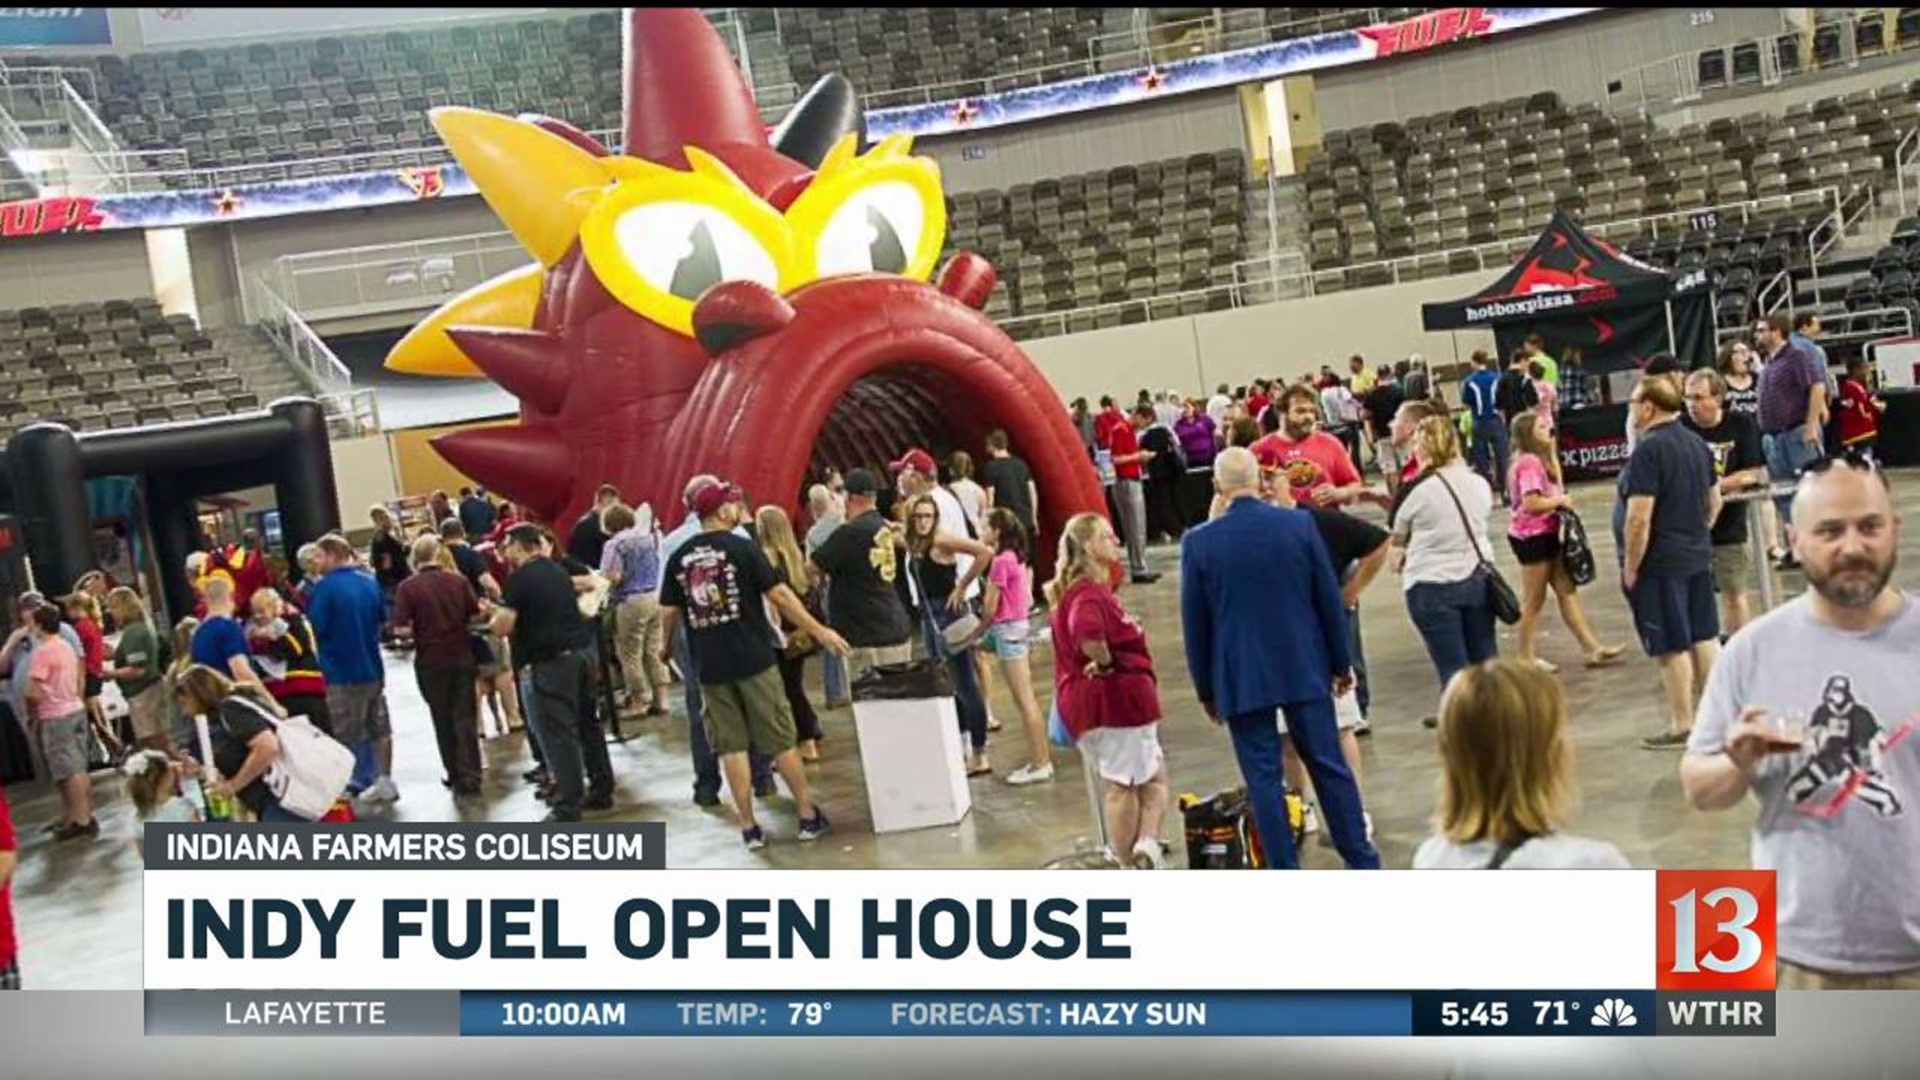 Indy Fuel Open House